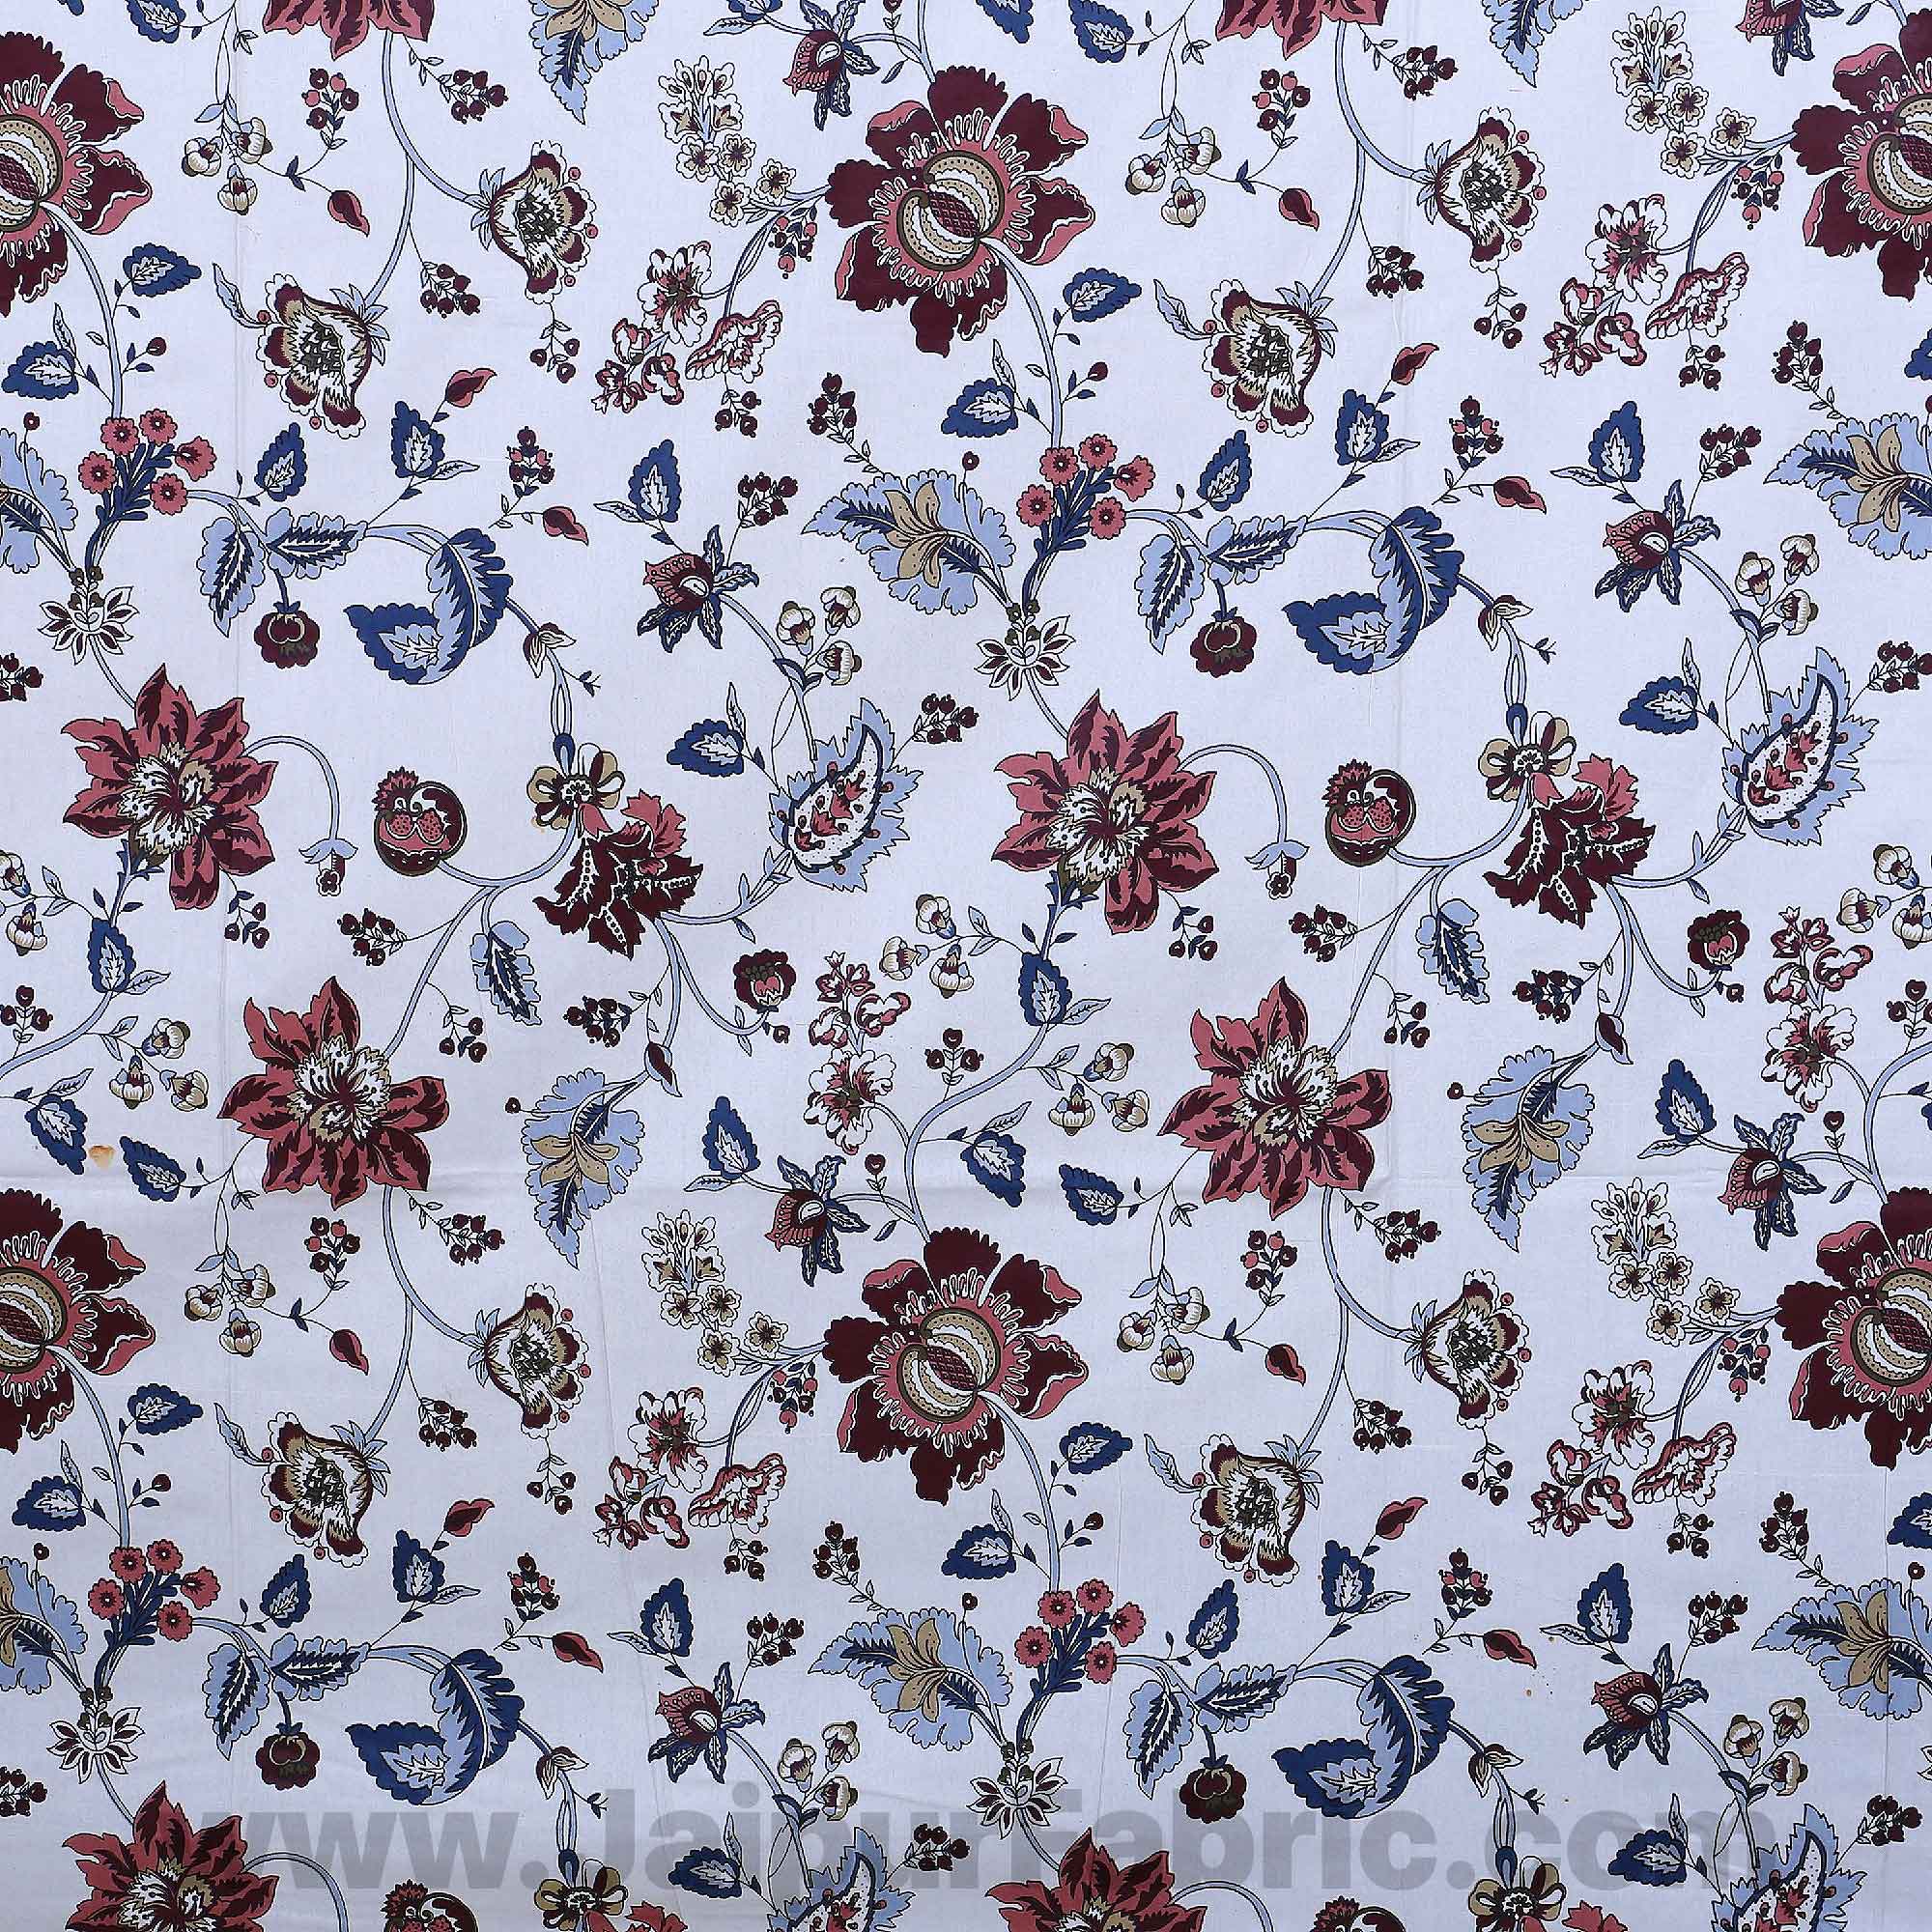 Pure Cotton 240 TC Double bedsheet in reddish floral pattern